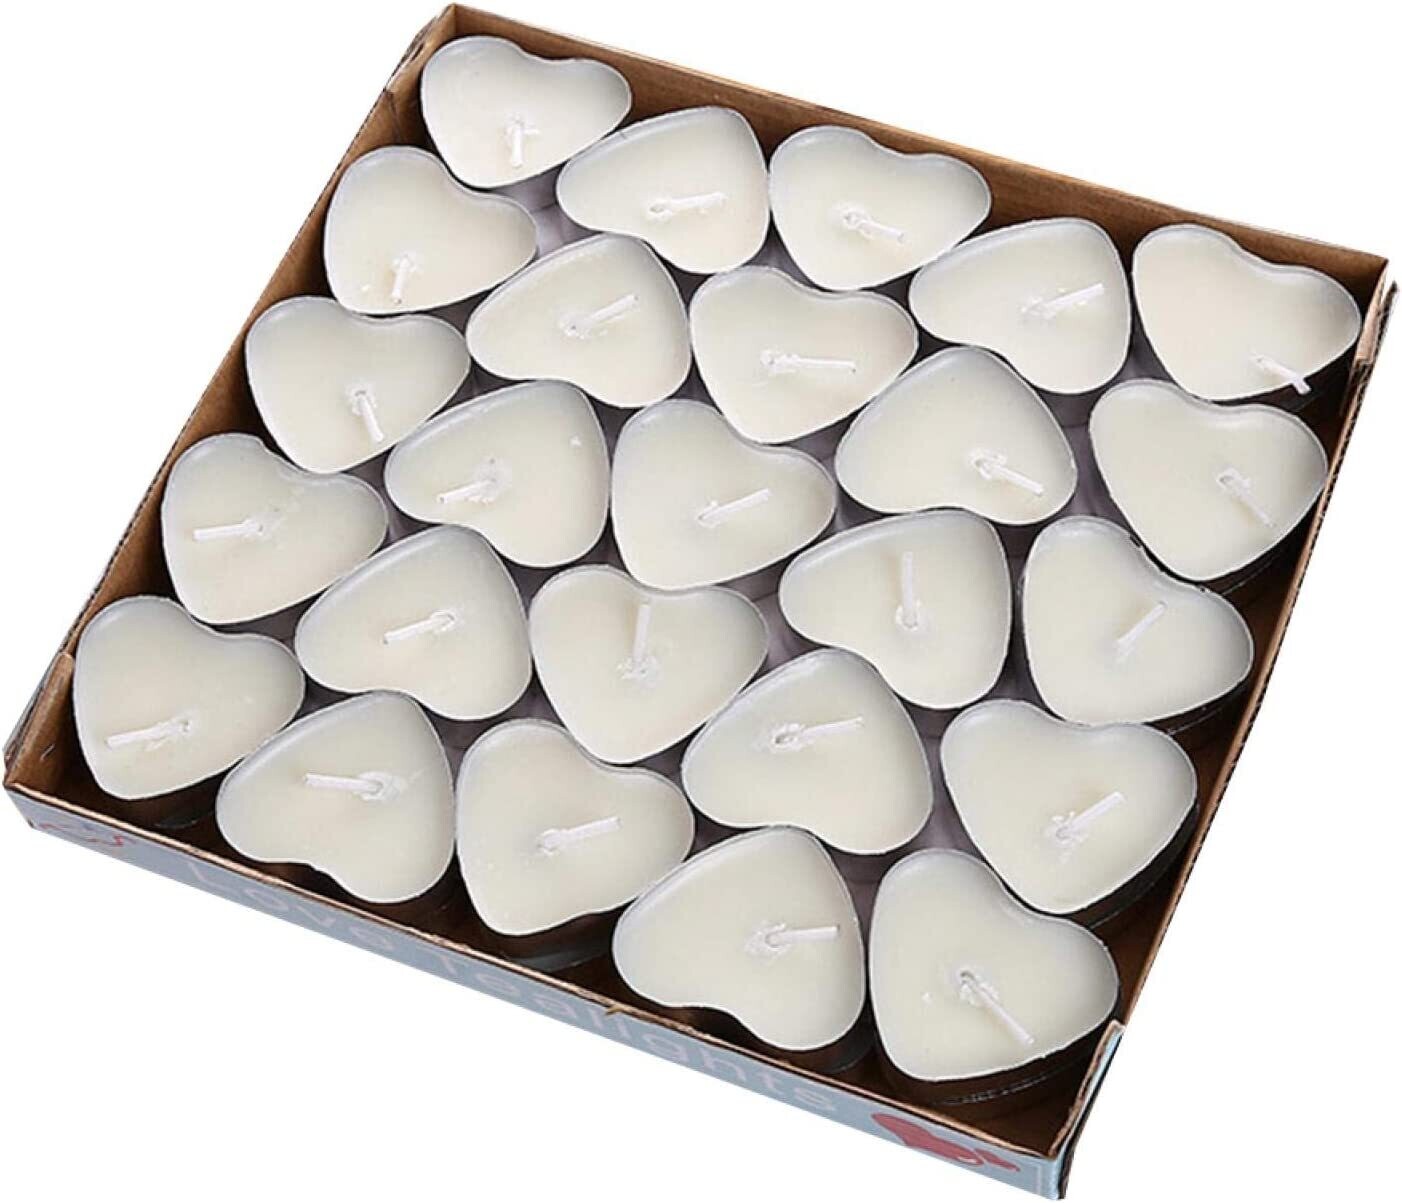 Candles Heart Shaped 50pcs, Smokeless Tealights Candle, Tea Light Candles for Birthday, Proposal, Wedding, Party, Red, Wedding Engagement, Valentines Day, Christmas WHITE CA02-CANDLE